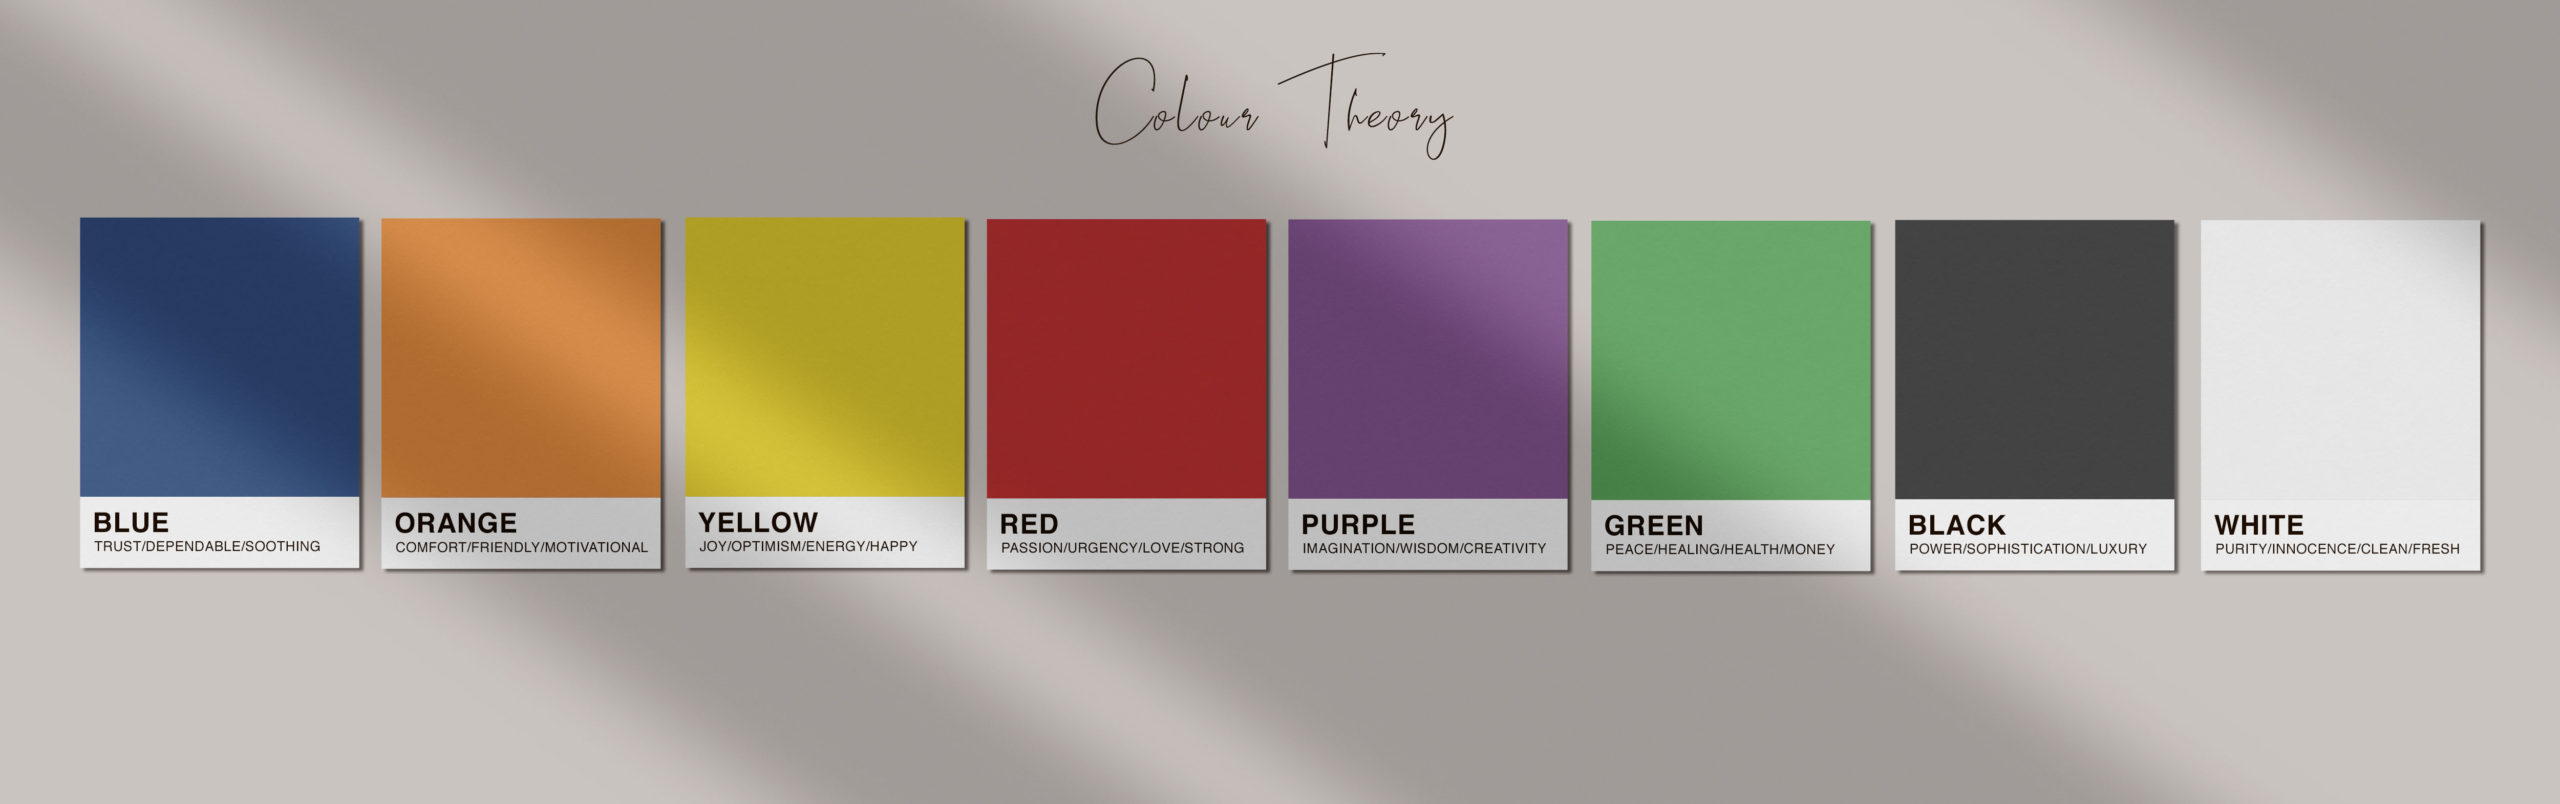 How to Design the Perfect Brand Color Palette